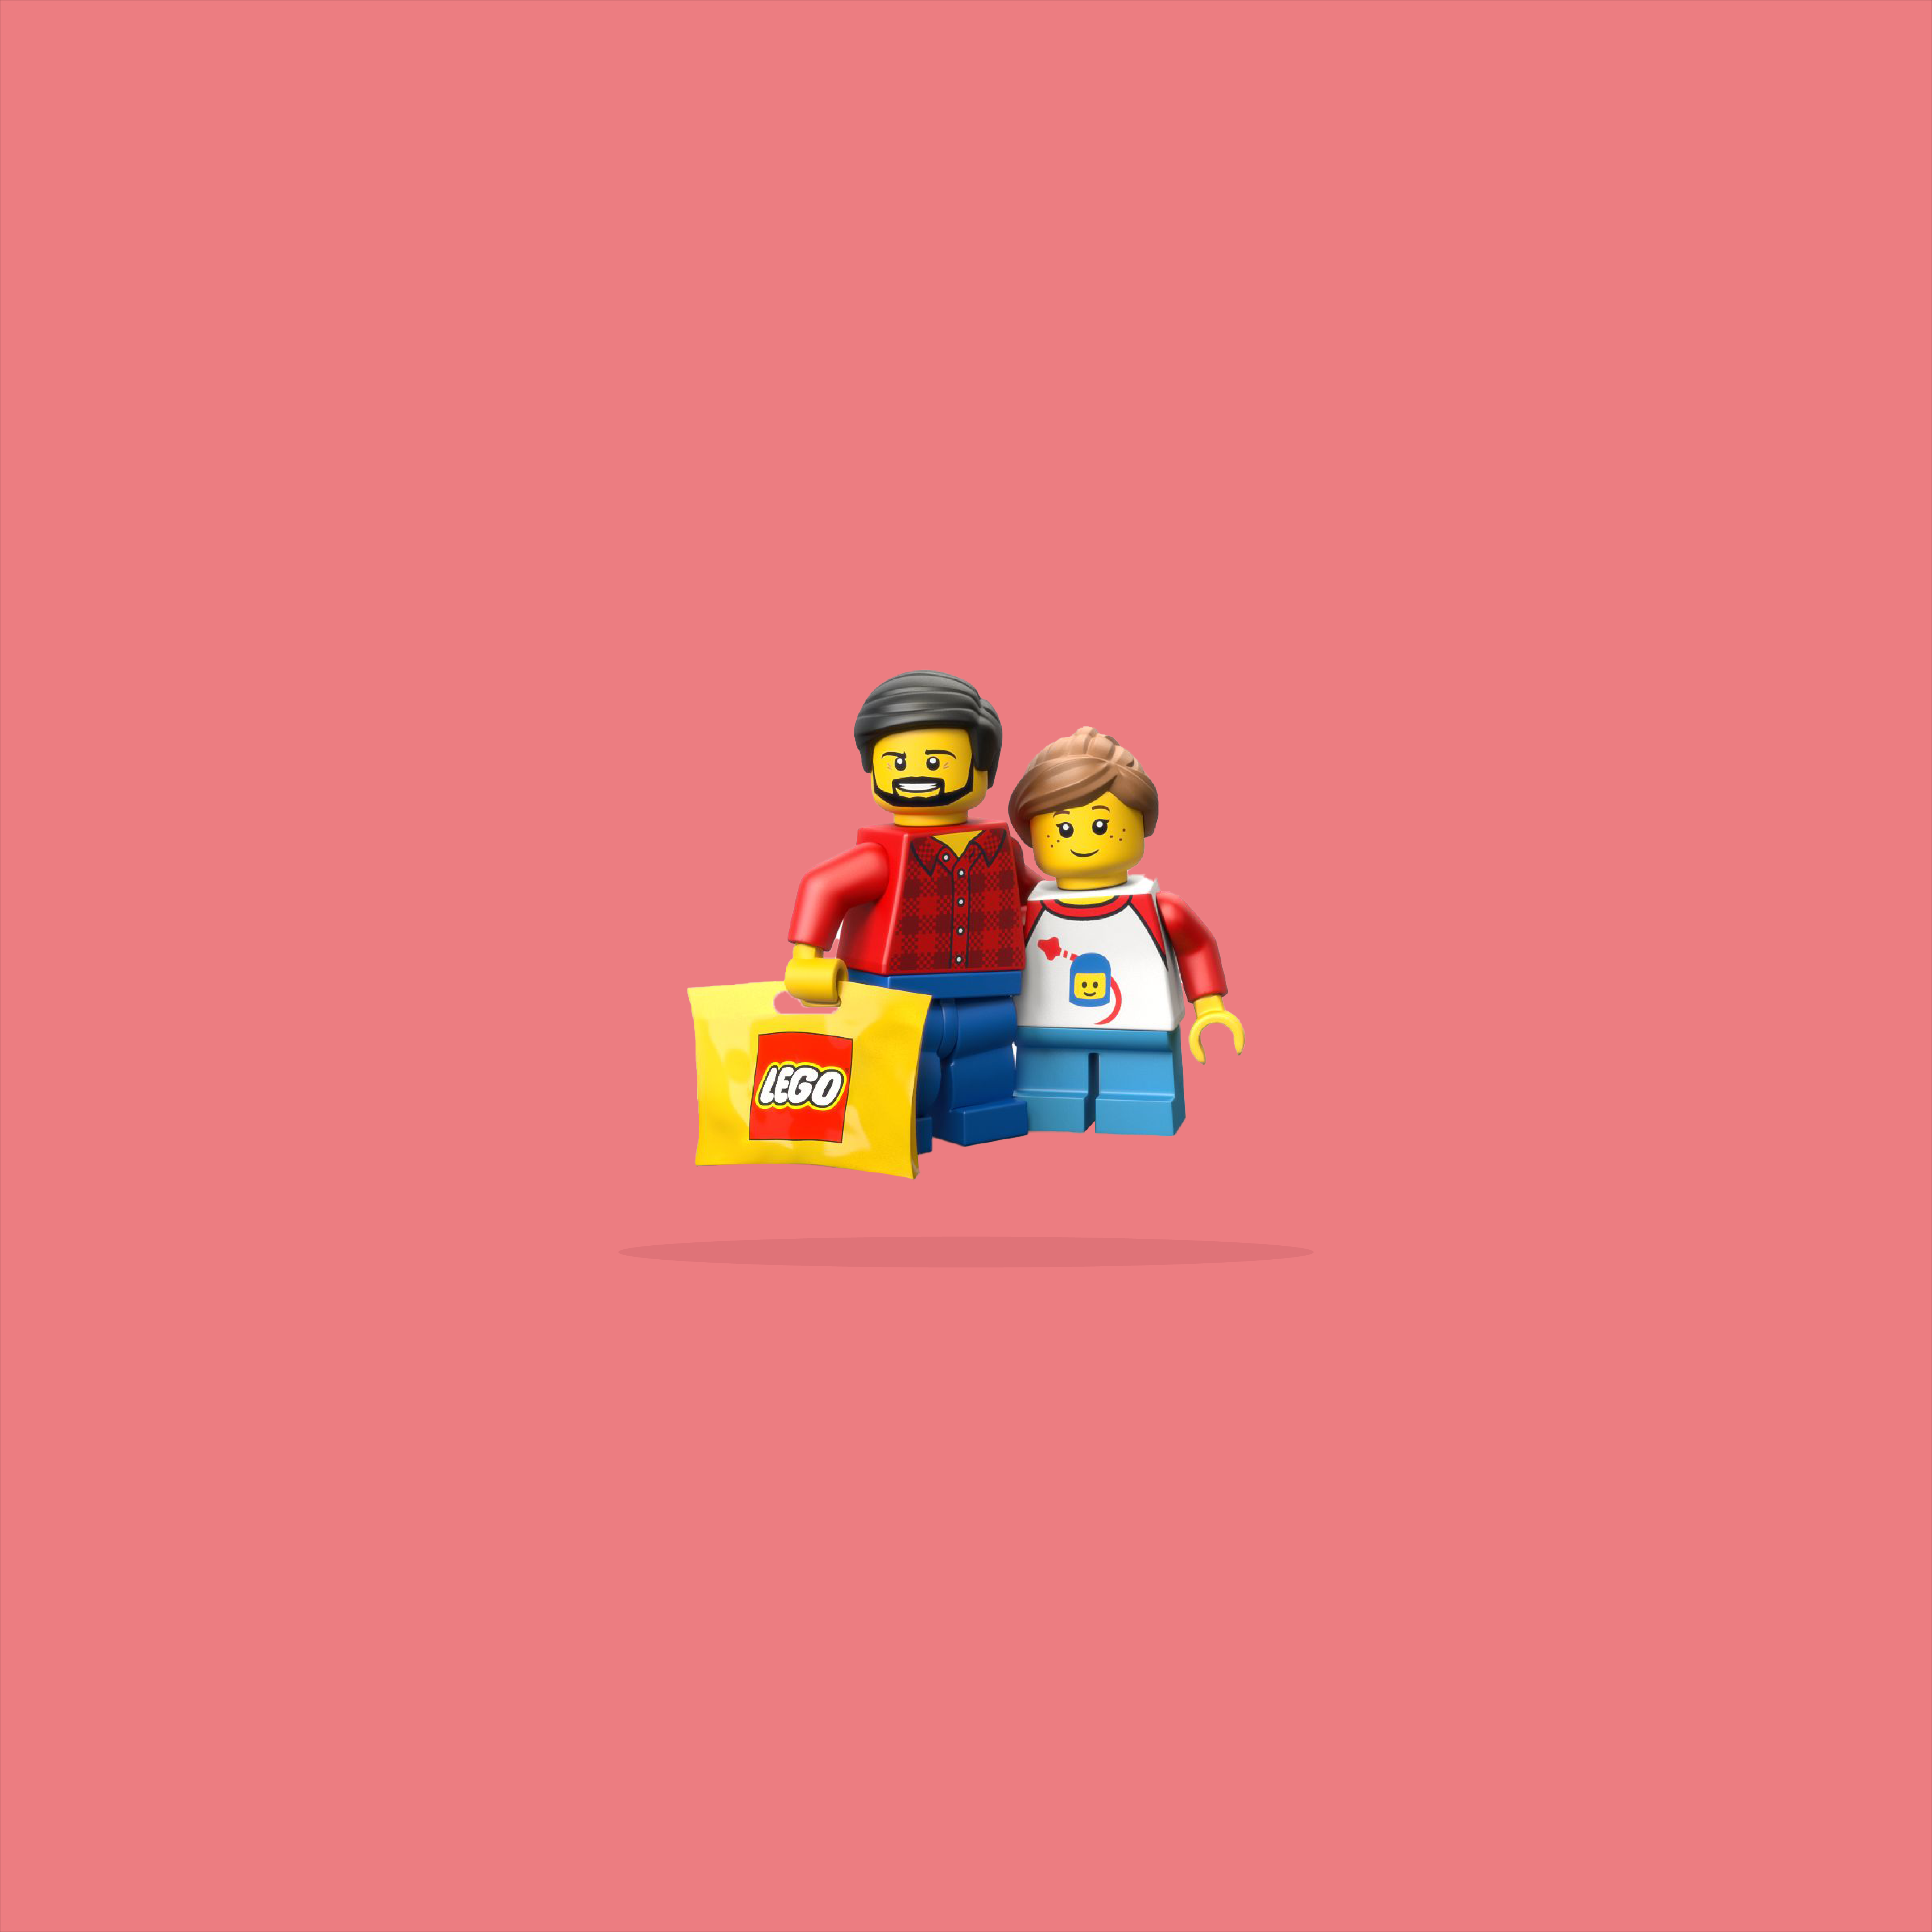 How LEGO Conquered the Adult Market (And Why You Should Care)